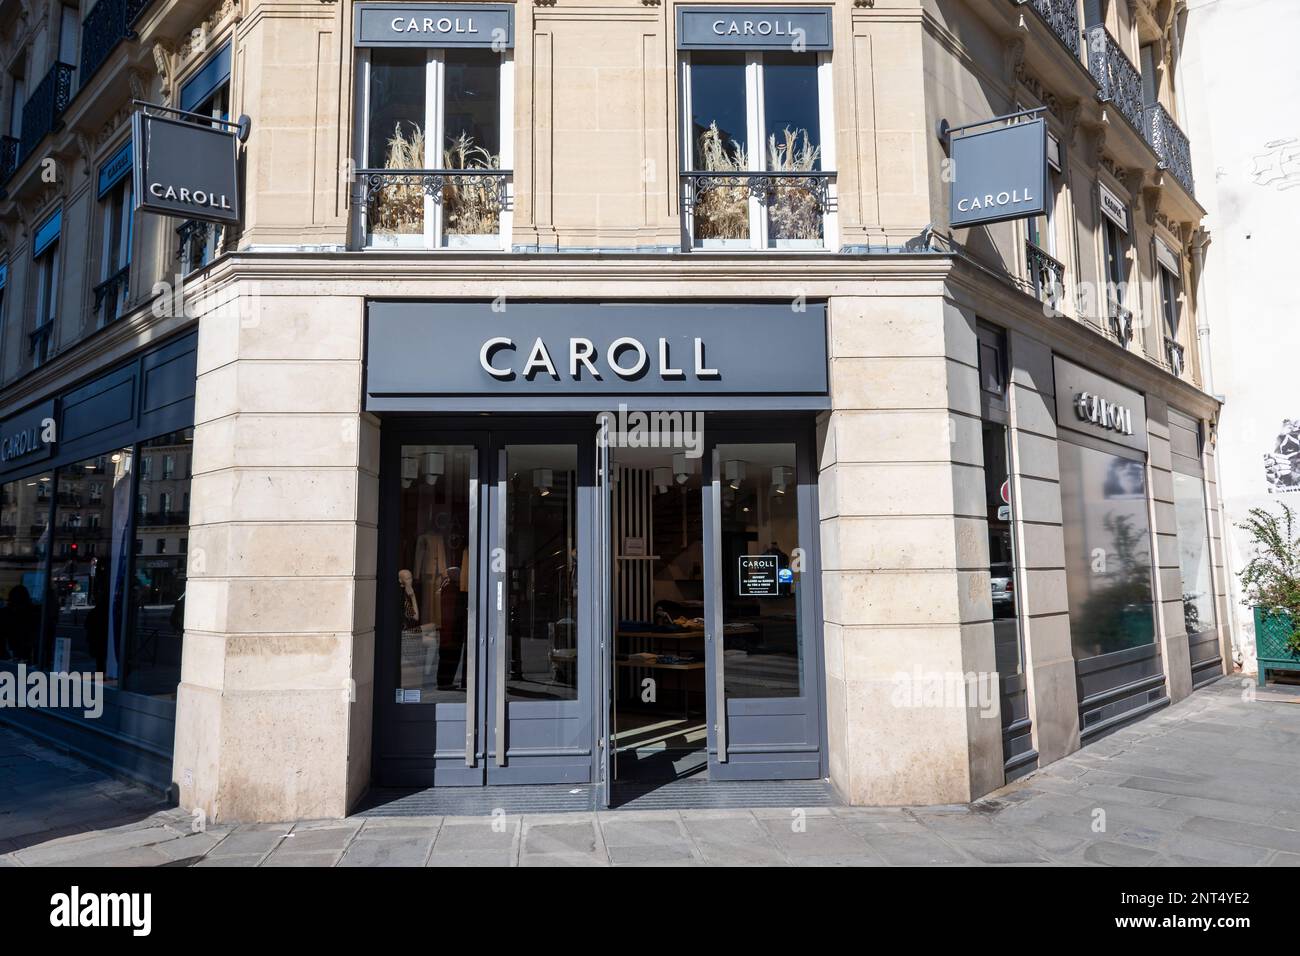 Exterior view of a Caroll boutique, a French company specializing in  women's ready-to-wear fashion and accessories Stock Photo - Alamy